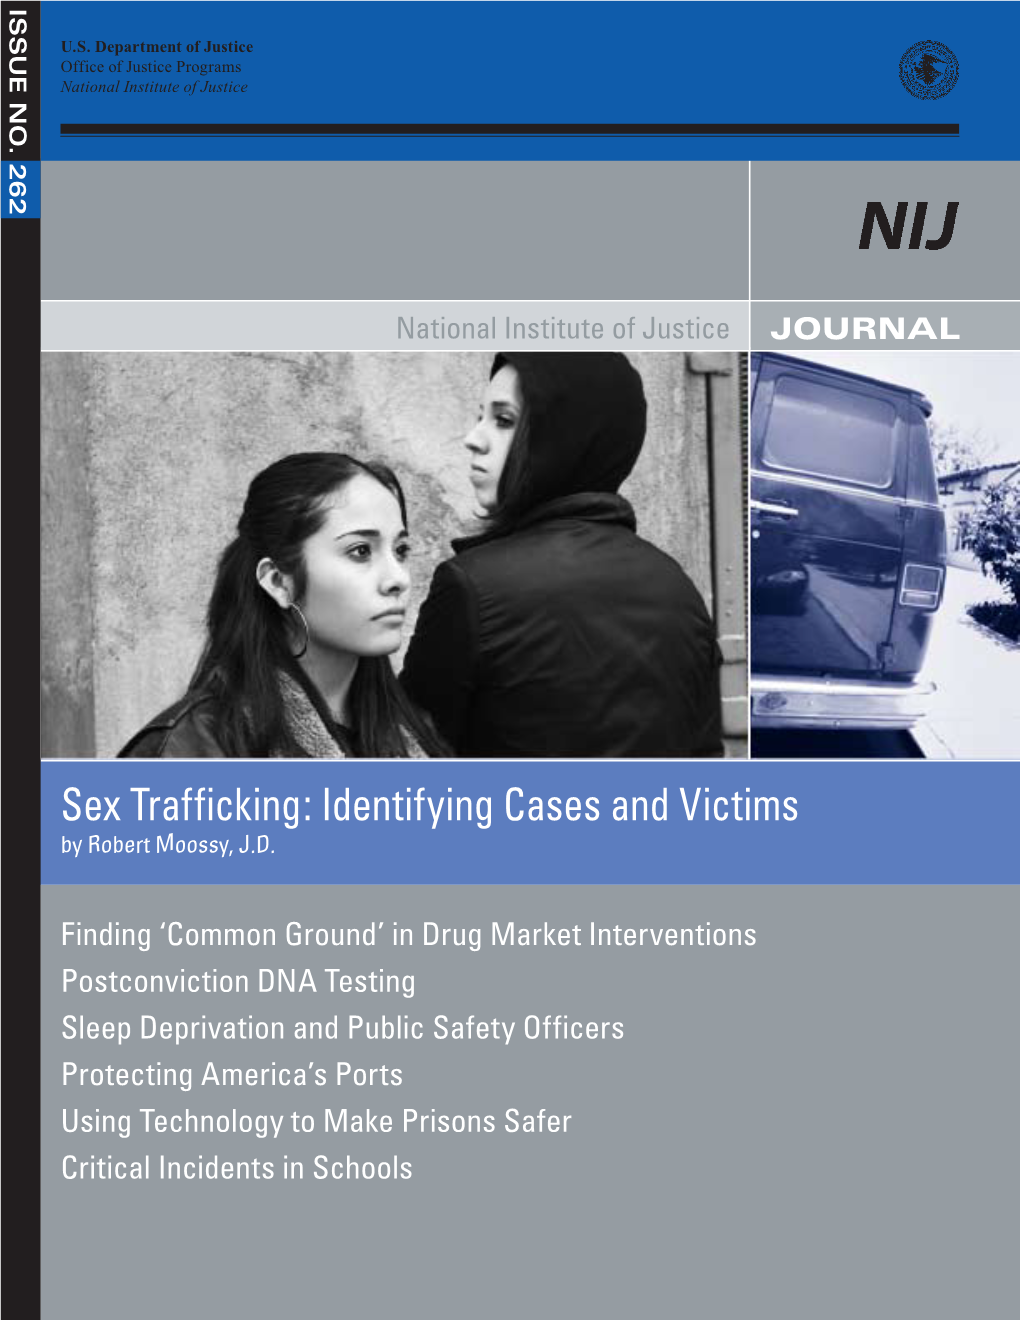 Sex Trafficking: Identifying Cases and Victims 2 by Robert Moossy, J.D